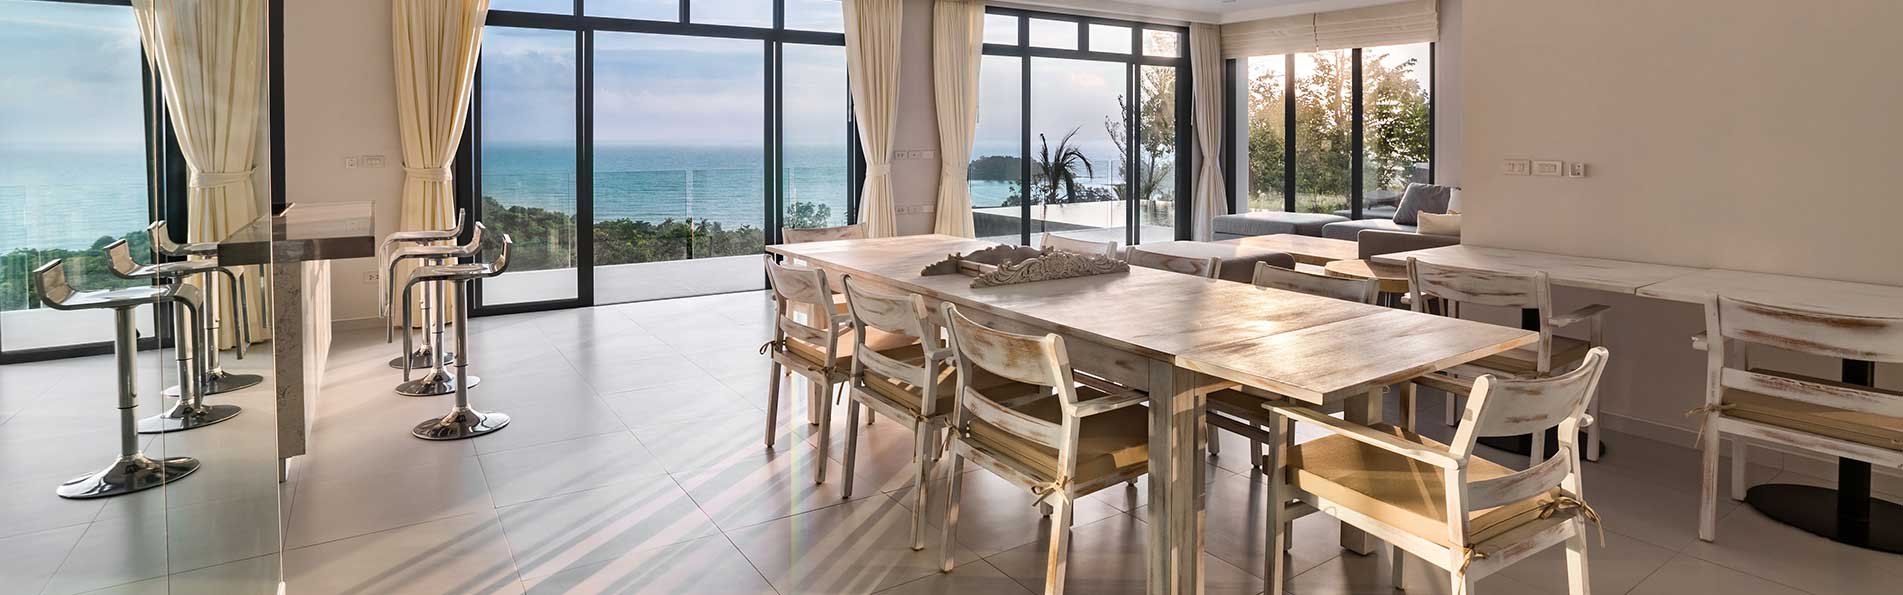 Villa dining room with ocean view.